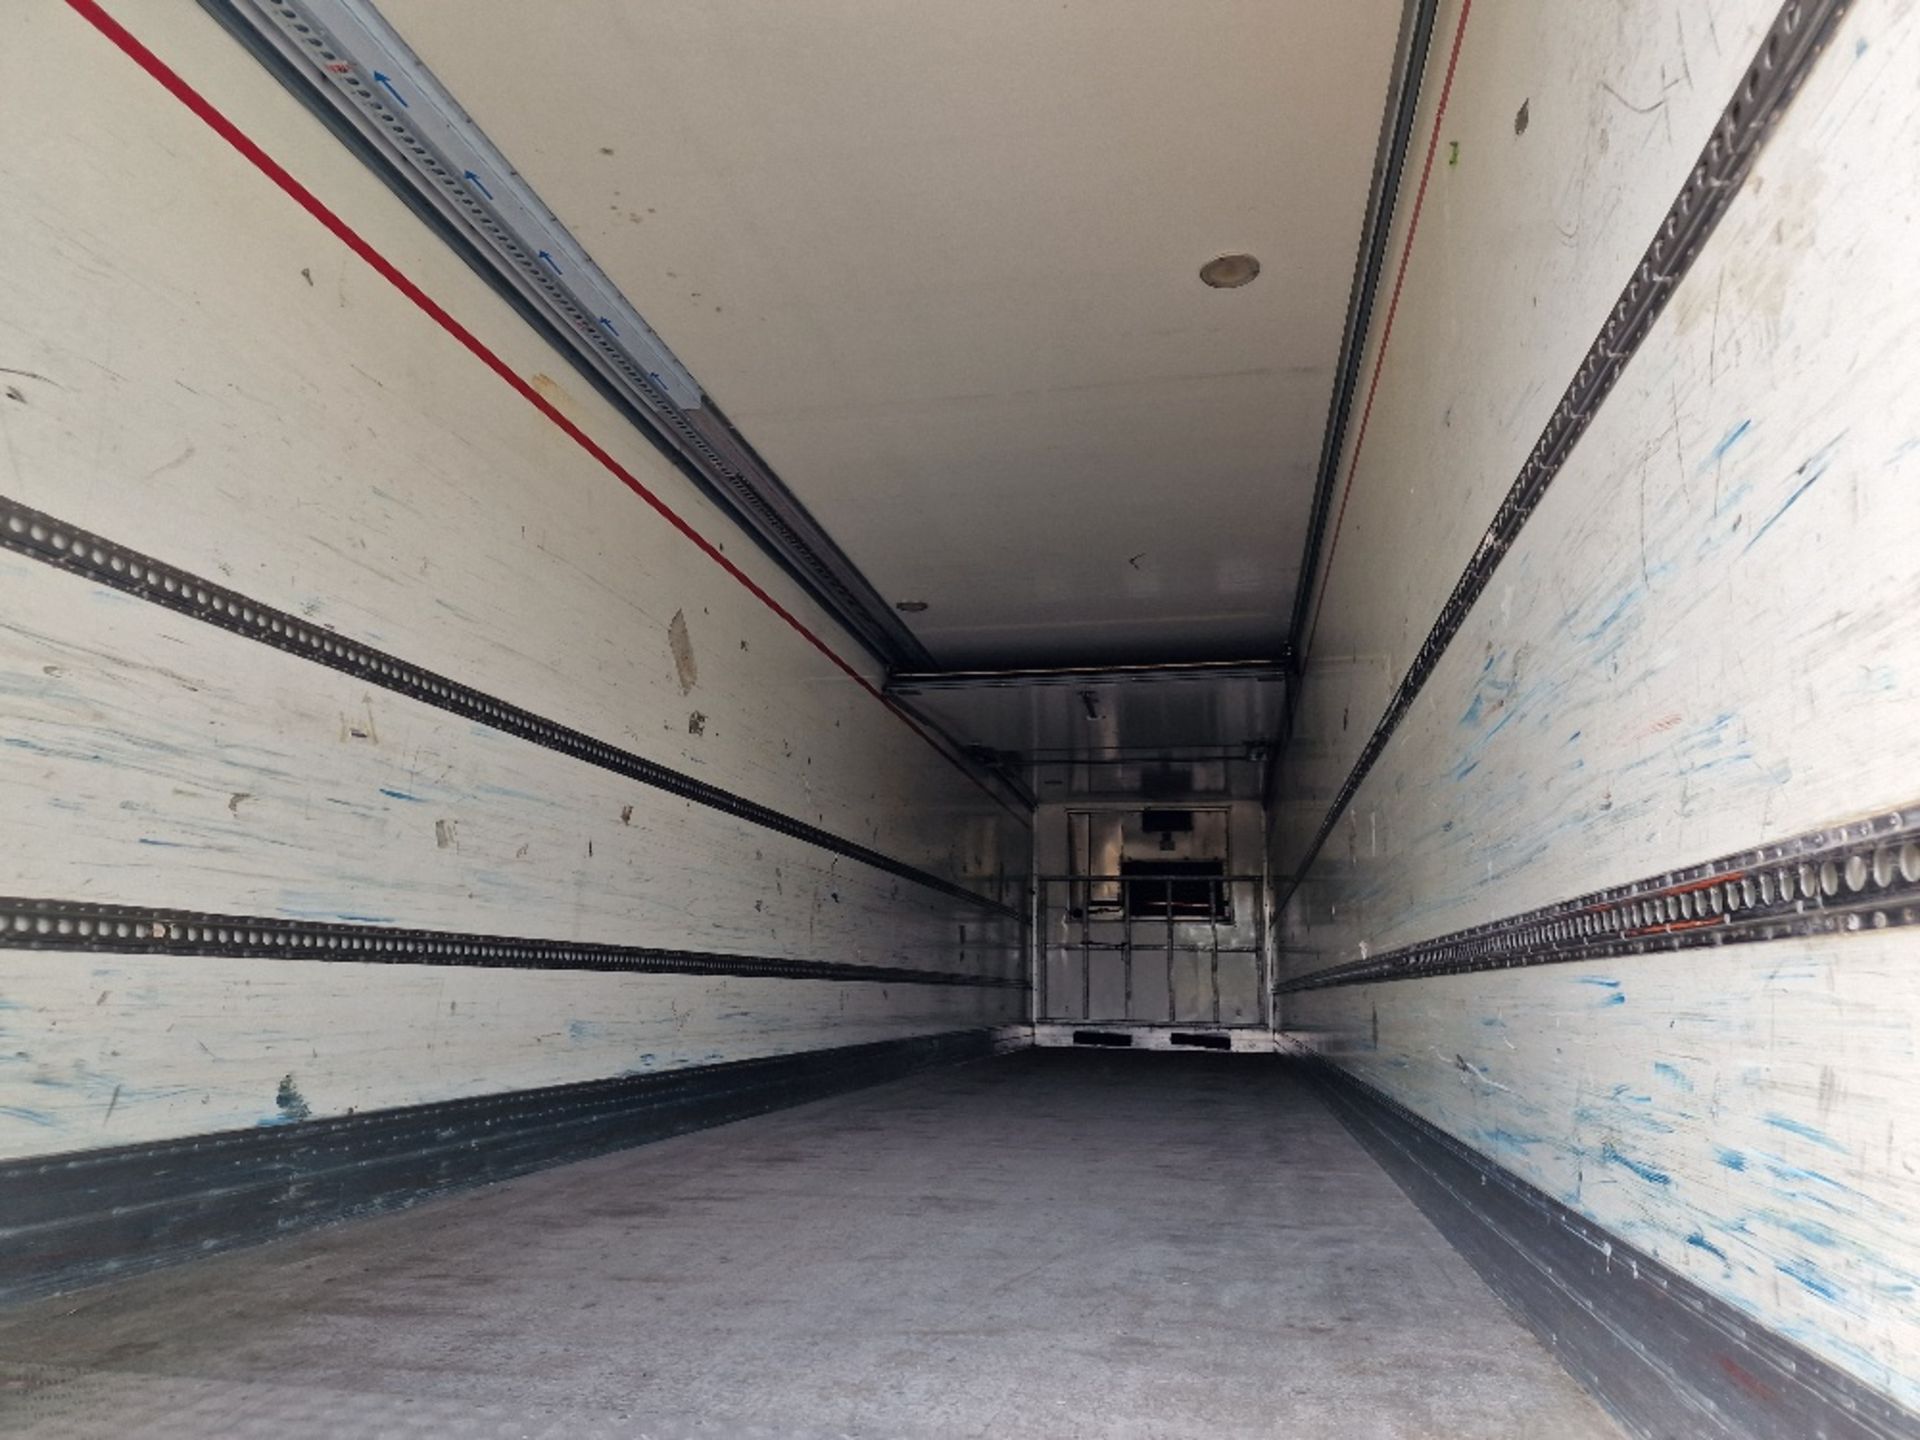 2010 Montracon 13.6m Tri-Axle Refrigerated Trailer - Image 10 of 19